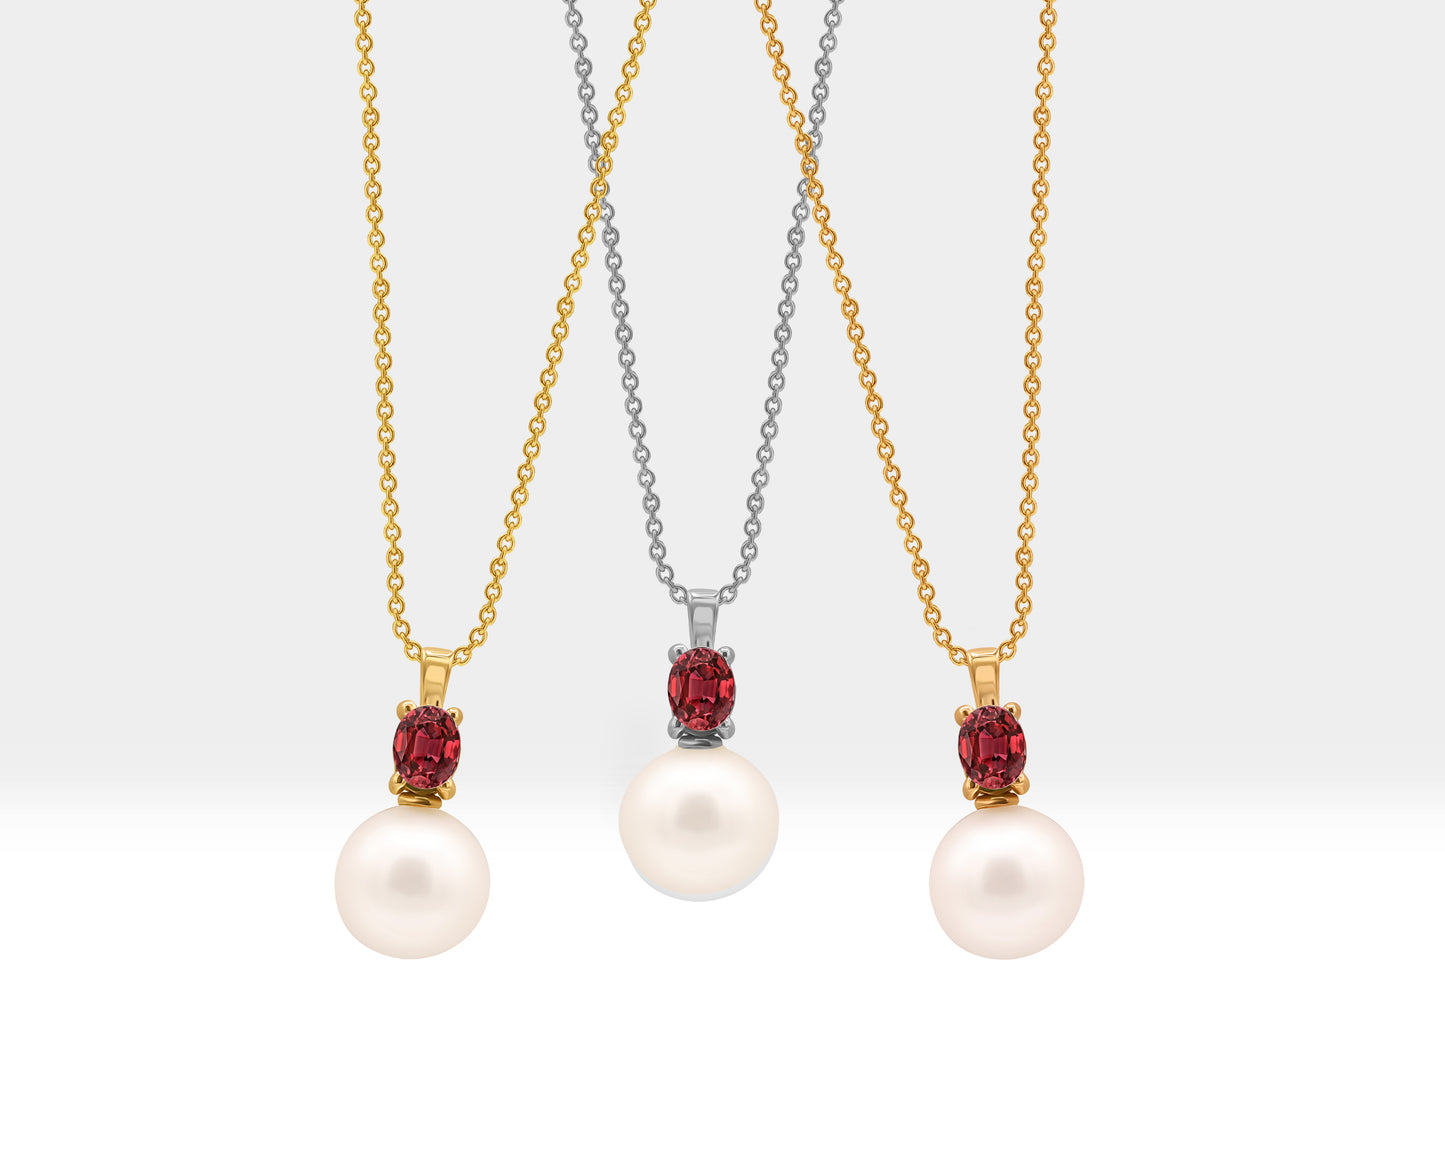 Pearl Necklace with Oval Ruby Set in 14K Solid Gold Bridal Jewelry Set of Pearl Necklace and Earrings Dangle Hoops for Wedding